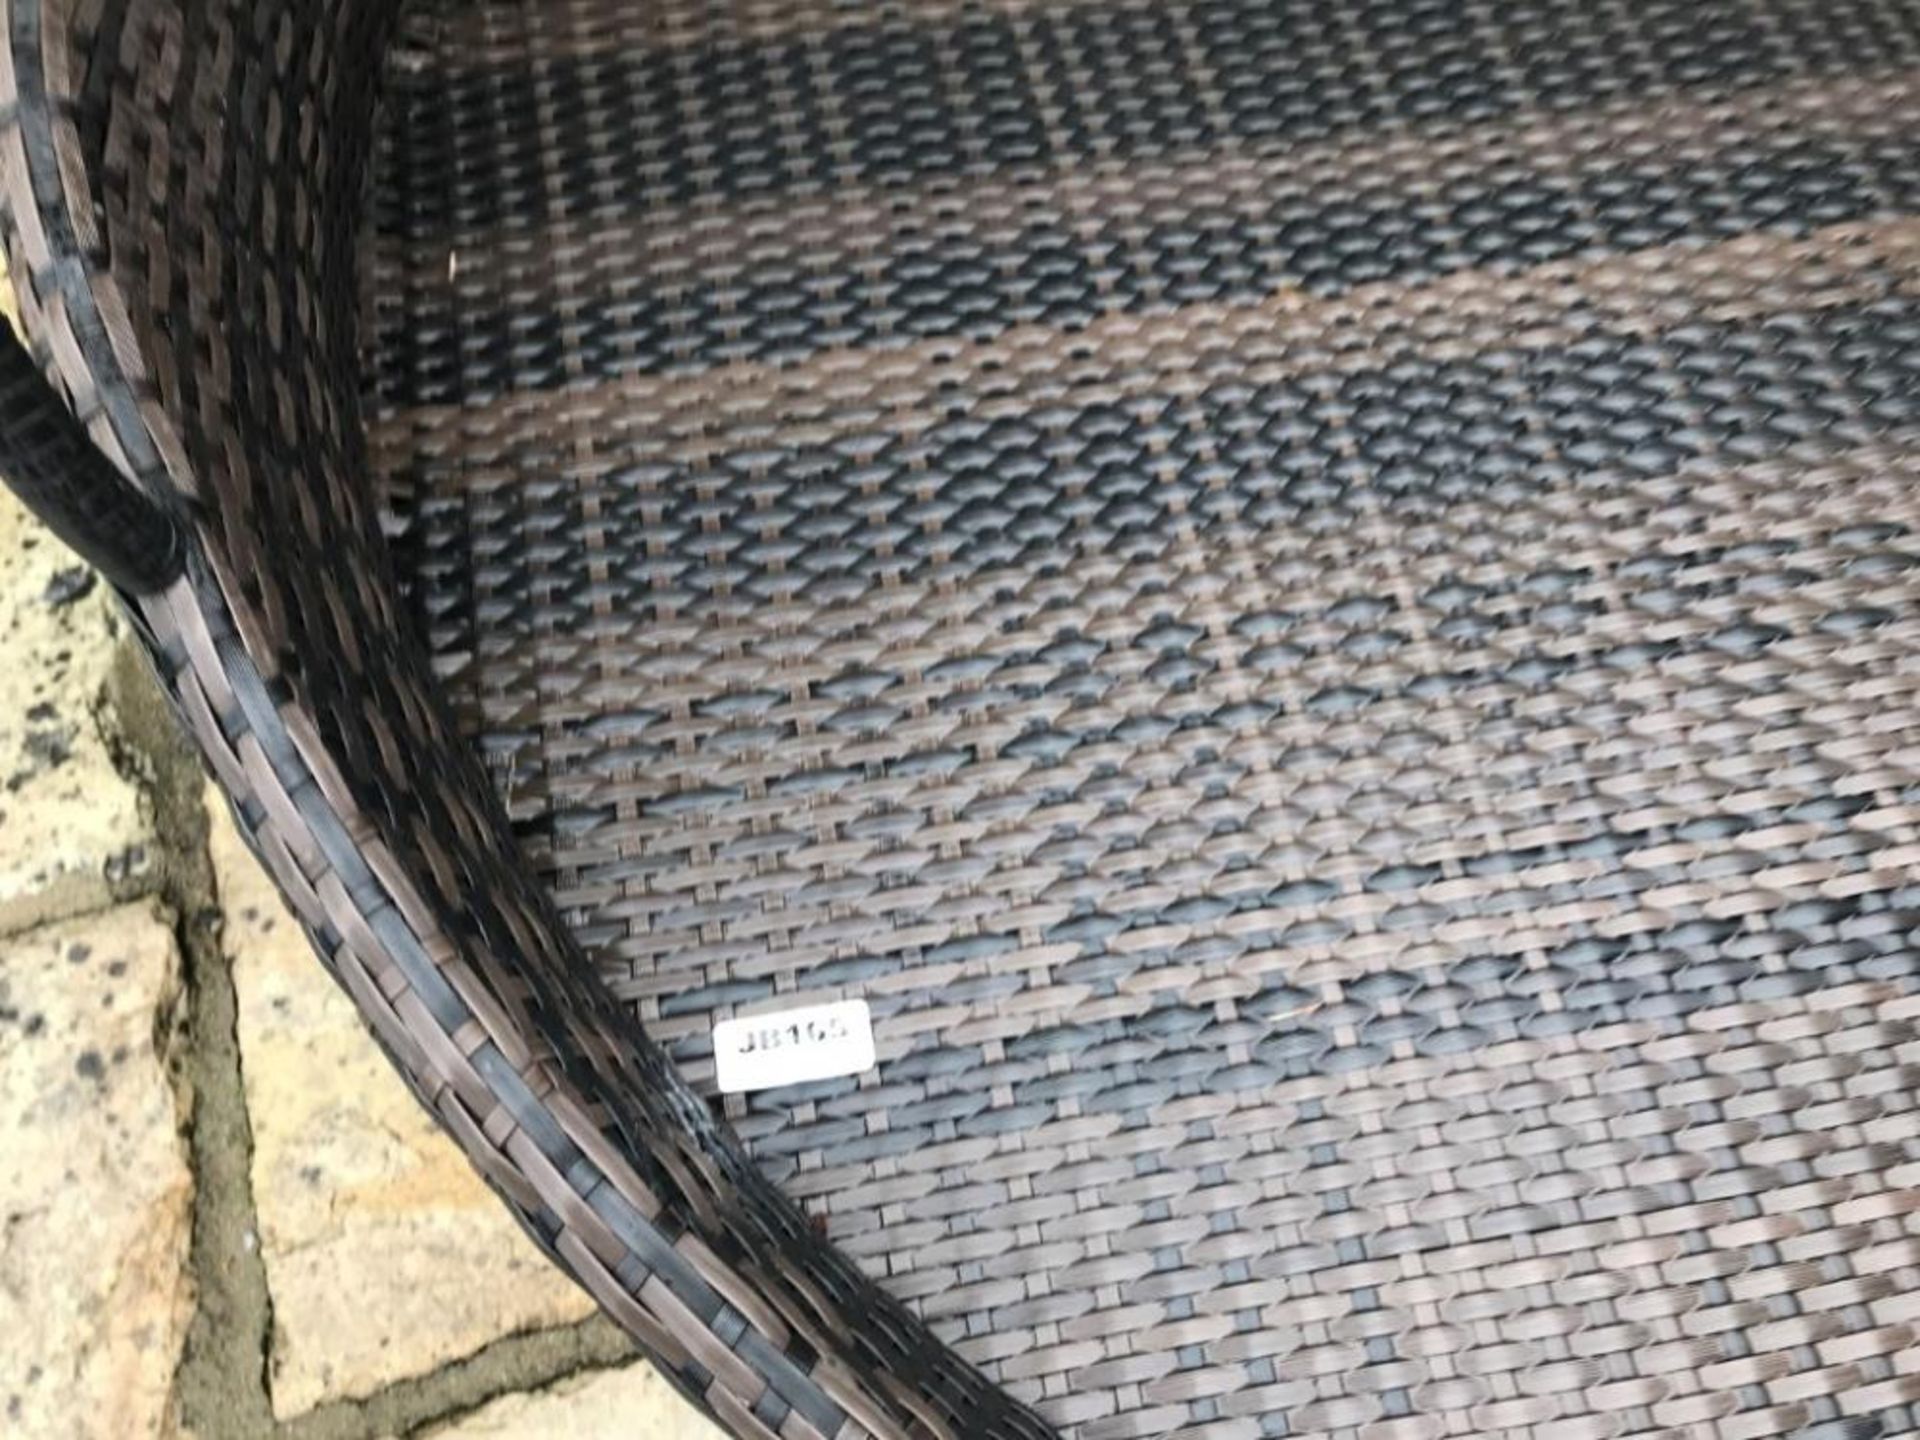 1 x Wicker / Rattan Round Daybed With Fabric Sun Hood - Ref: JB165 - Pre-Owned - NO VAT ON THE HAMME - Image 3 of 7